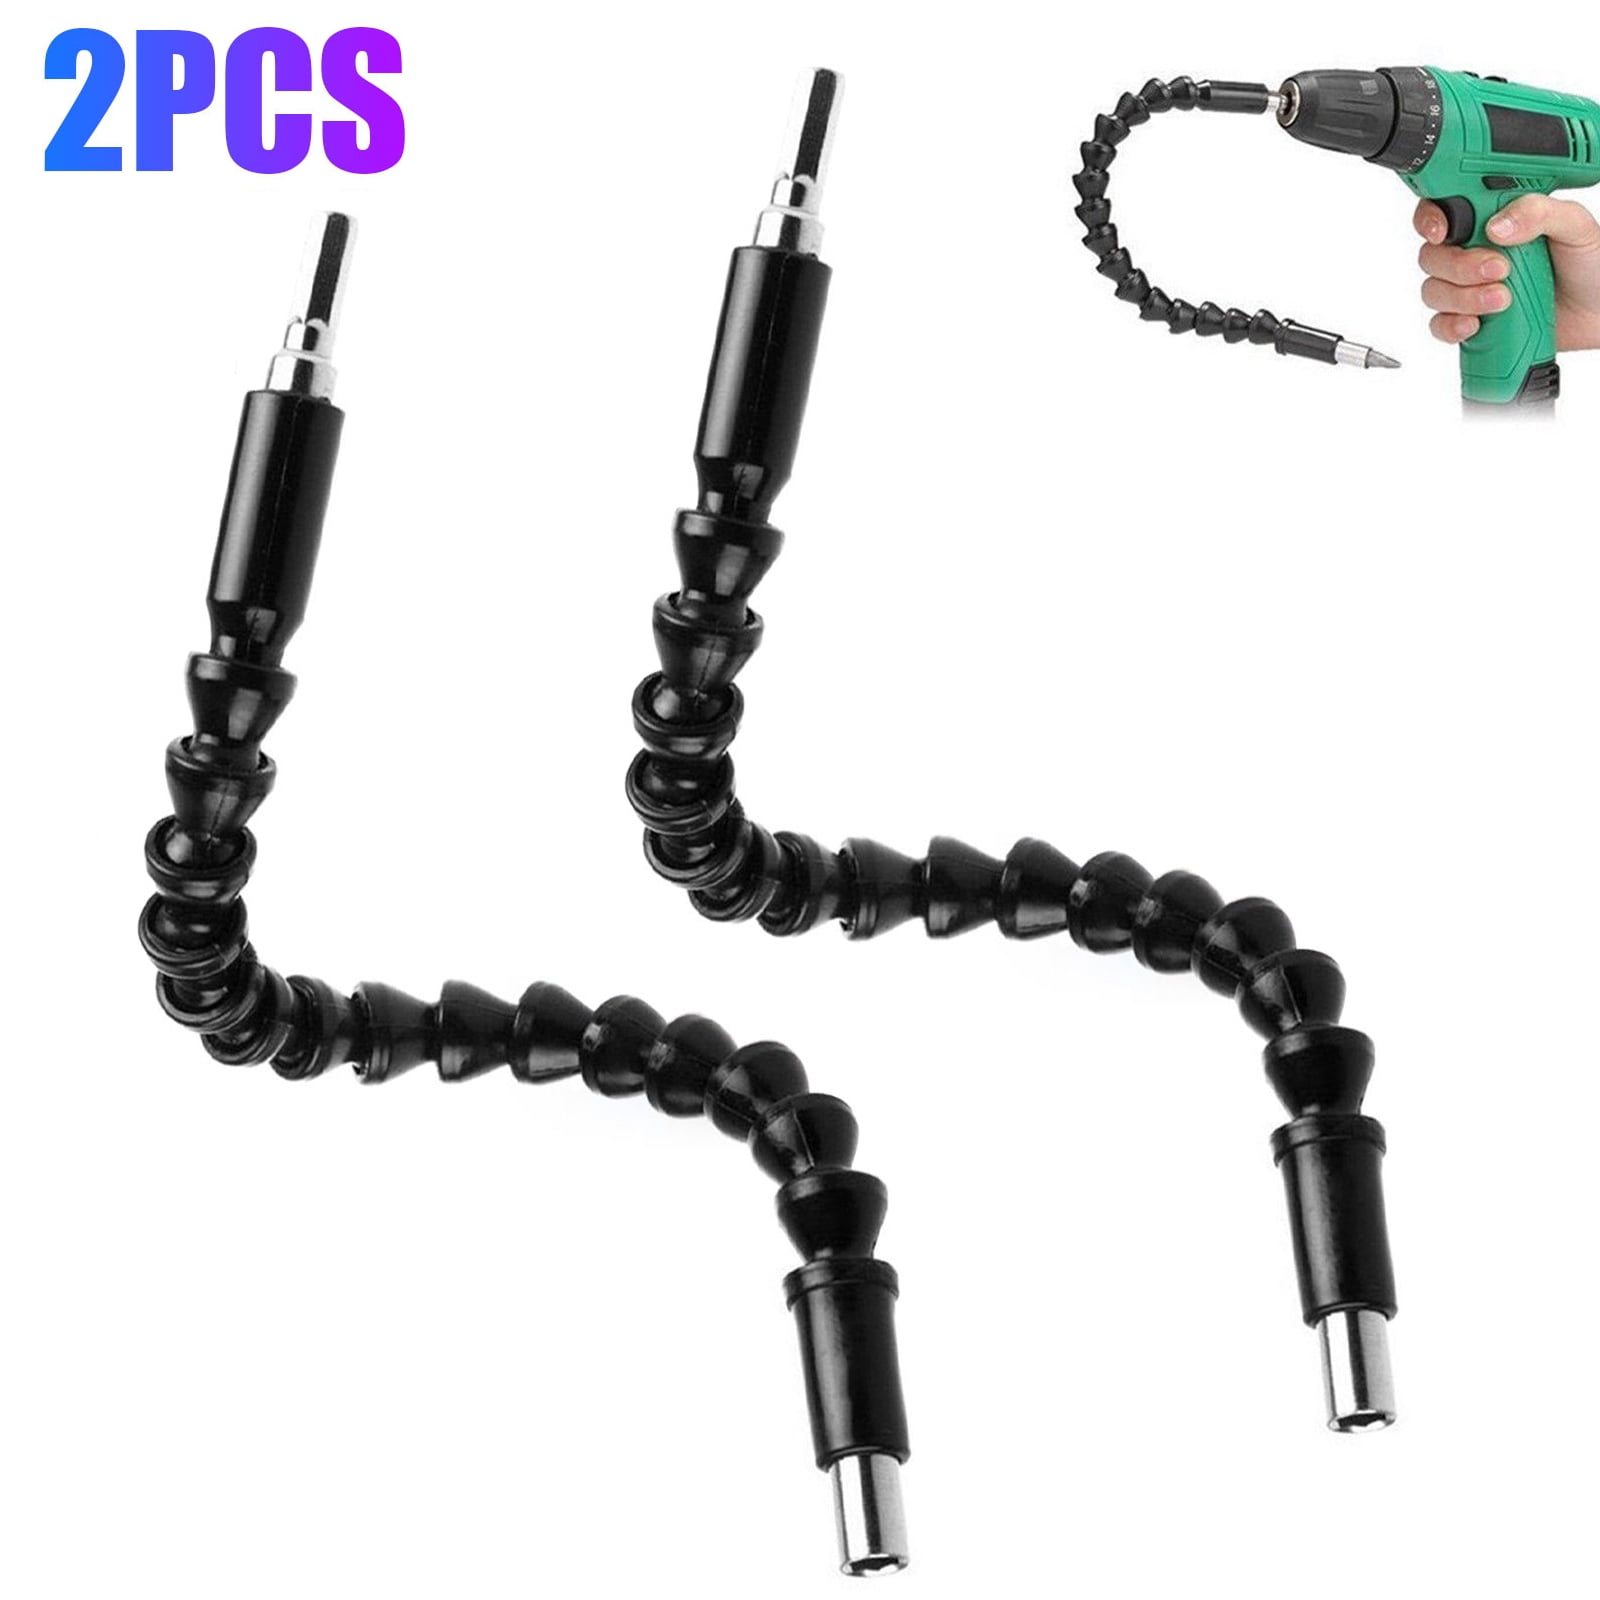 Flexible Shaft Head Drill Bit Extension Soft Adaptor Tip Kit for Chassis Electrical Cabinets Extension Screwdriver Power Set With Screw Bits Holder Magnetic Hexagon Flex Drive For Furniture Hex Shaft